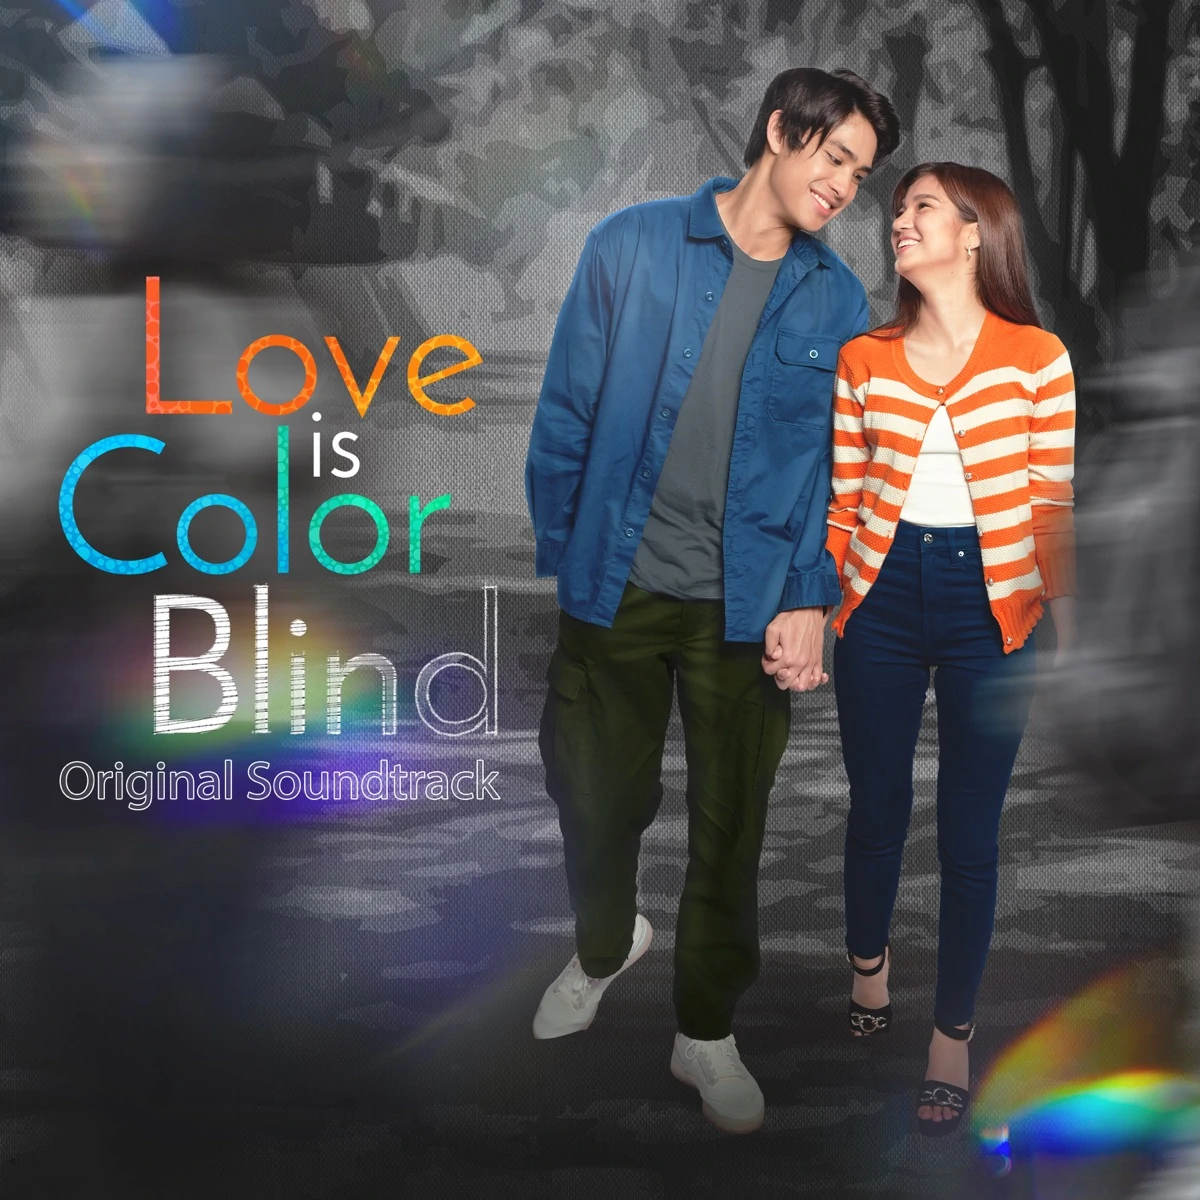 Love Is Color Blind - Wikipedia